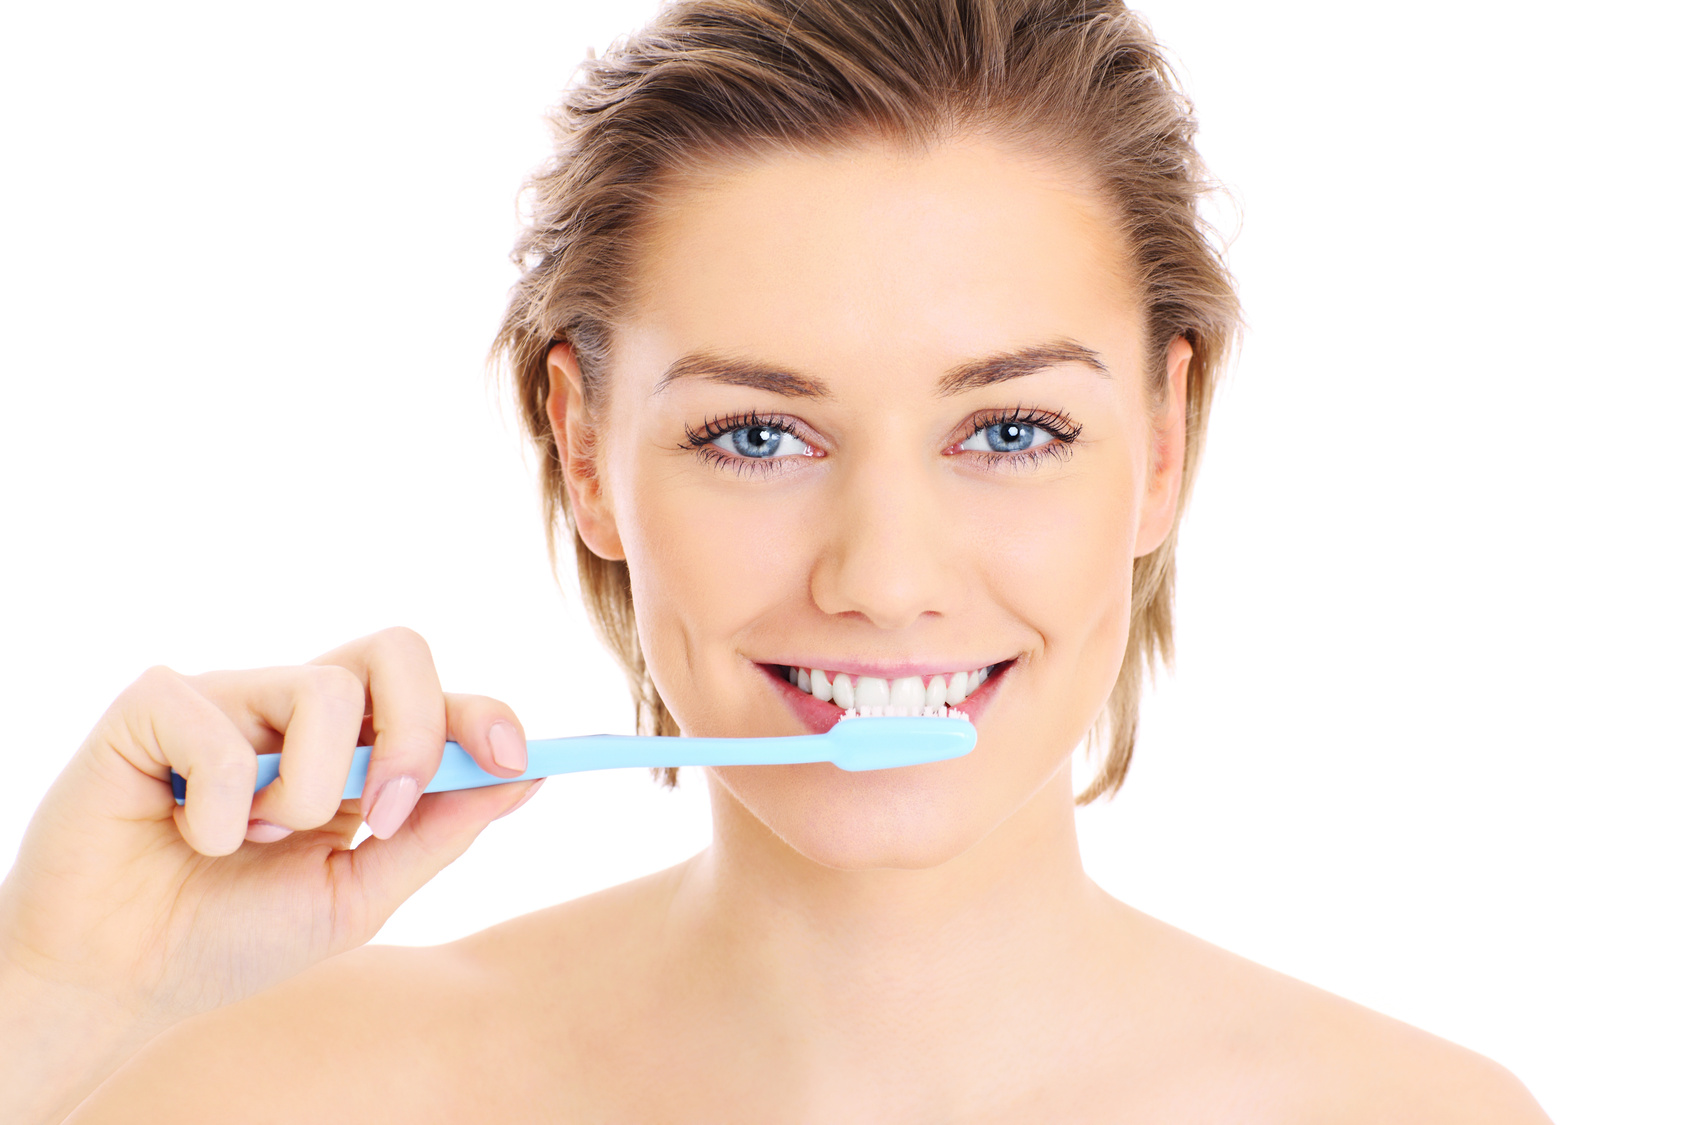 A picture of a young pretty woman brushing her teeth over white background